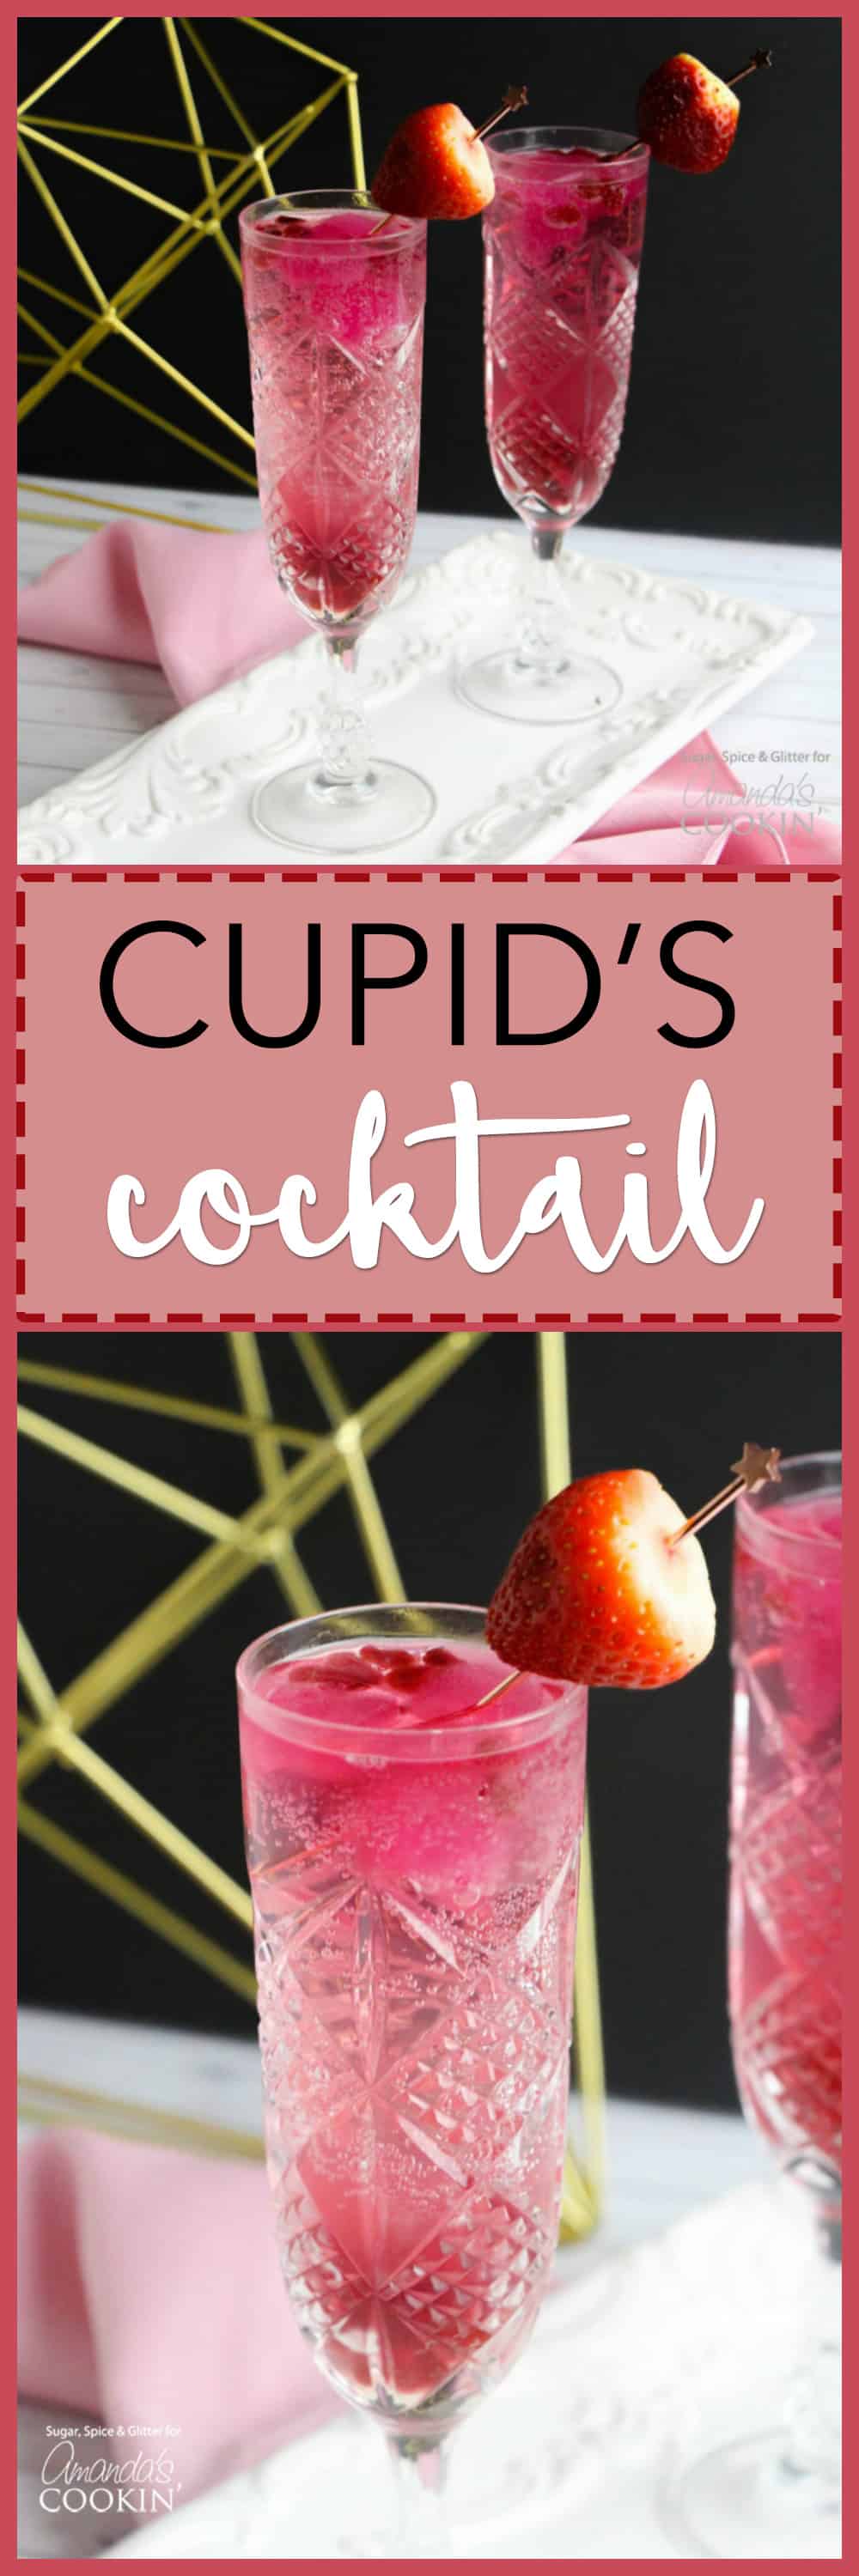 Cupid's Cocktail: a Valentine's Day cocktail infused with fruit